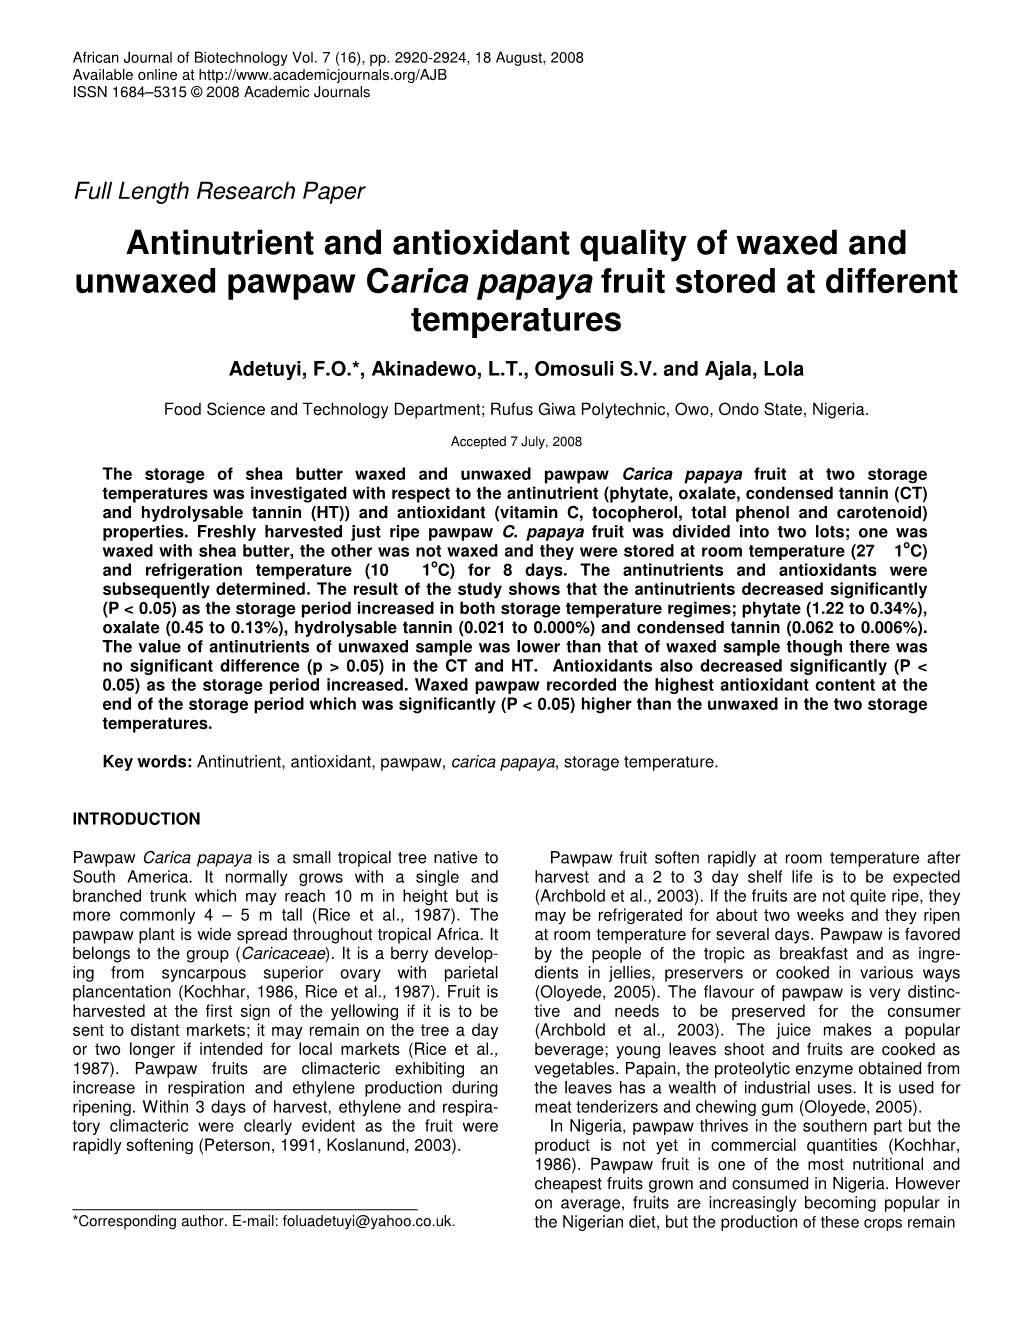 Antinutrient and Antioxidant Quality of Waxed and Unwaxed Pawpaw Carica Papaya Fruit Stored at Different Temperatures